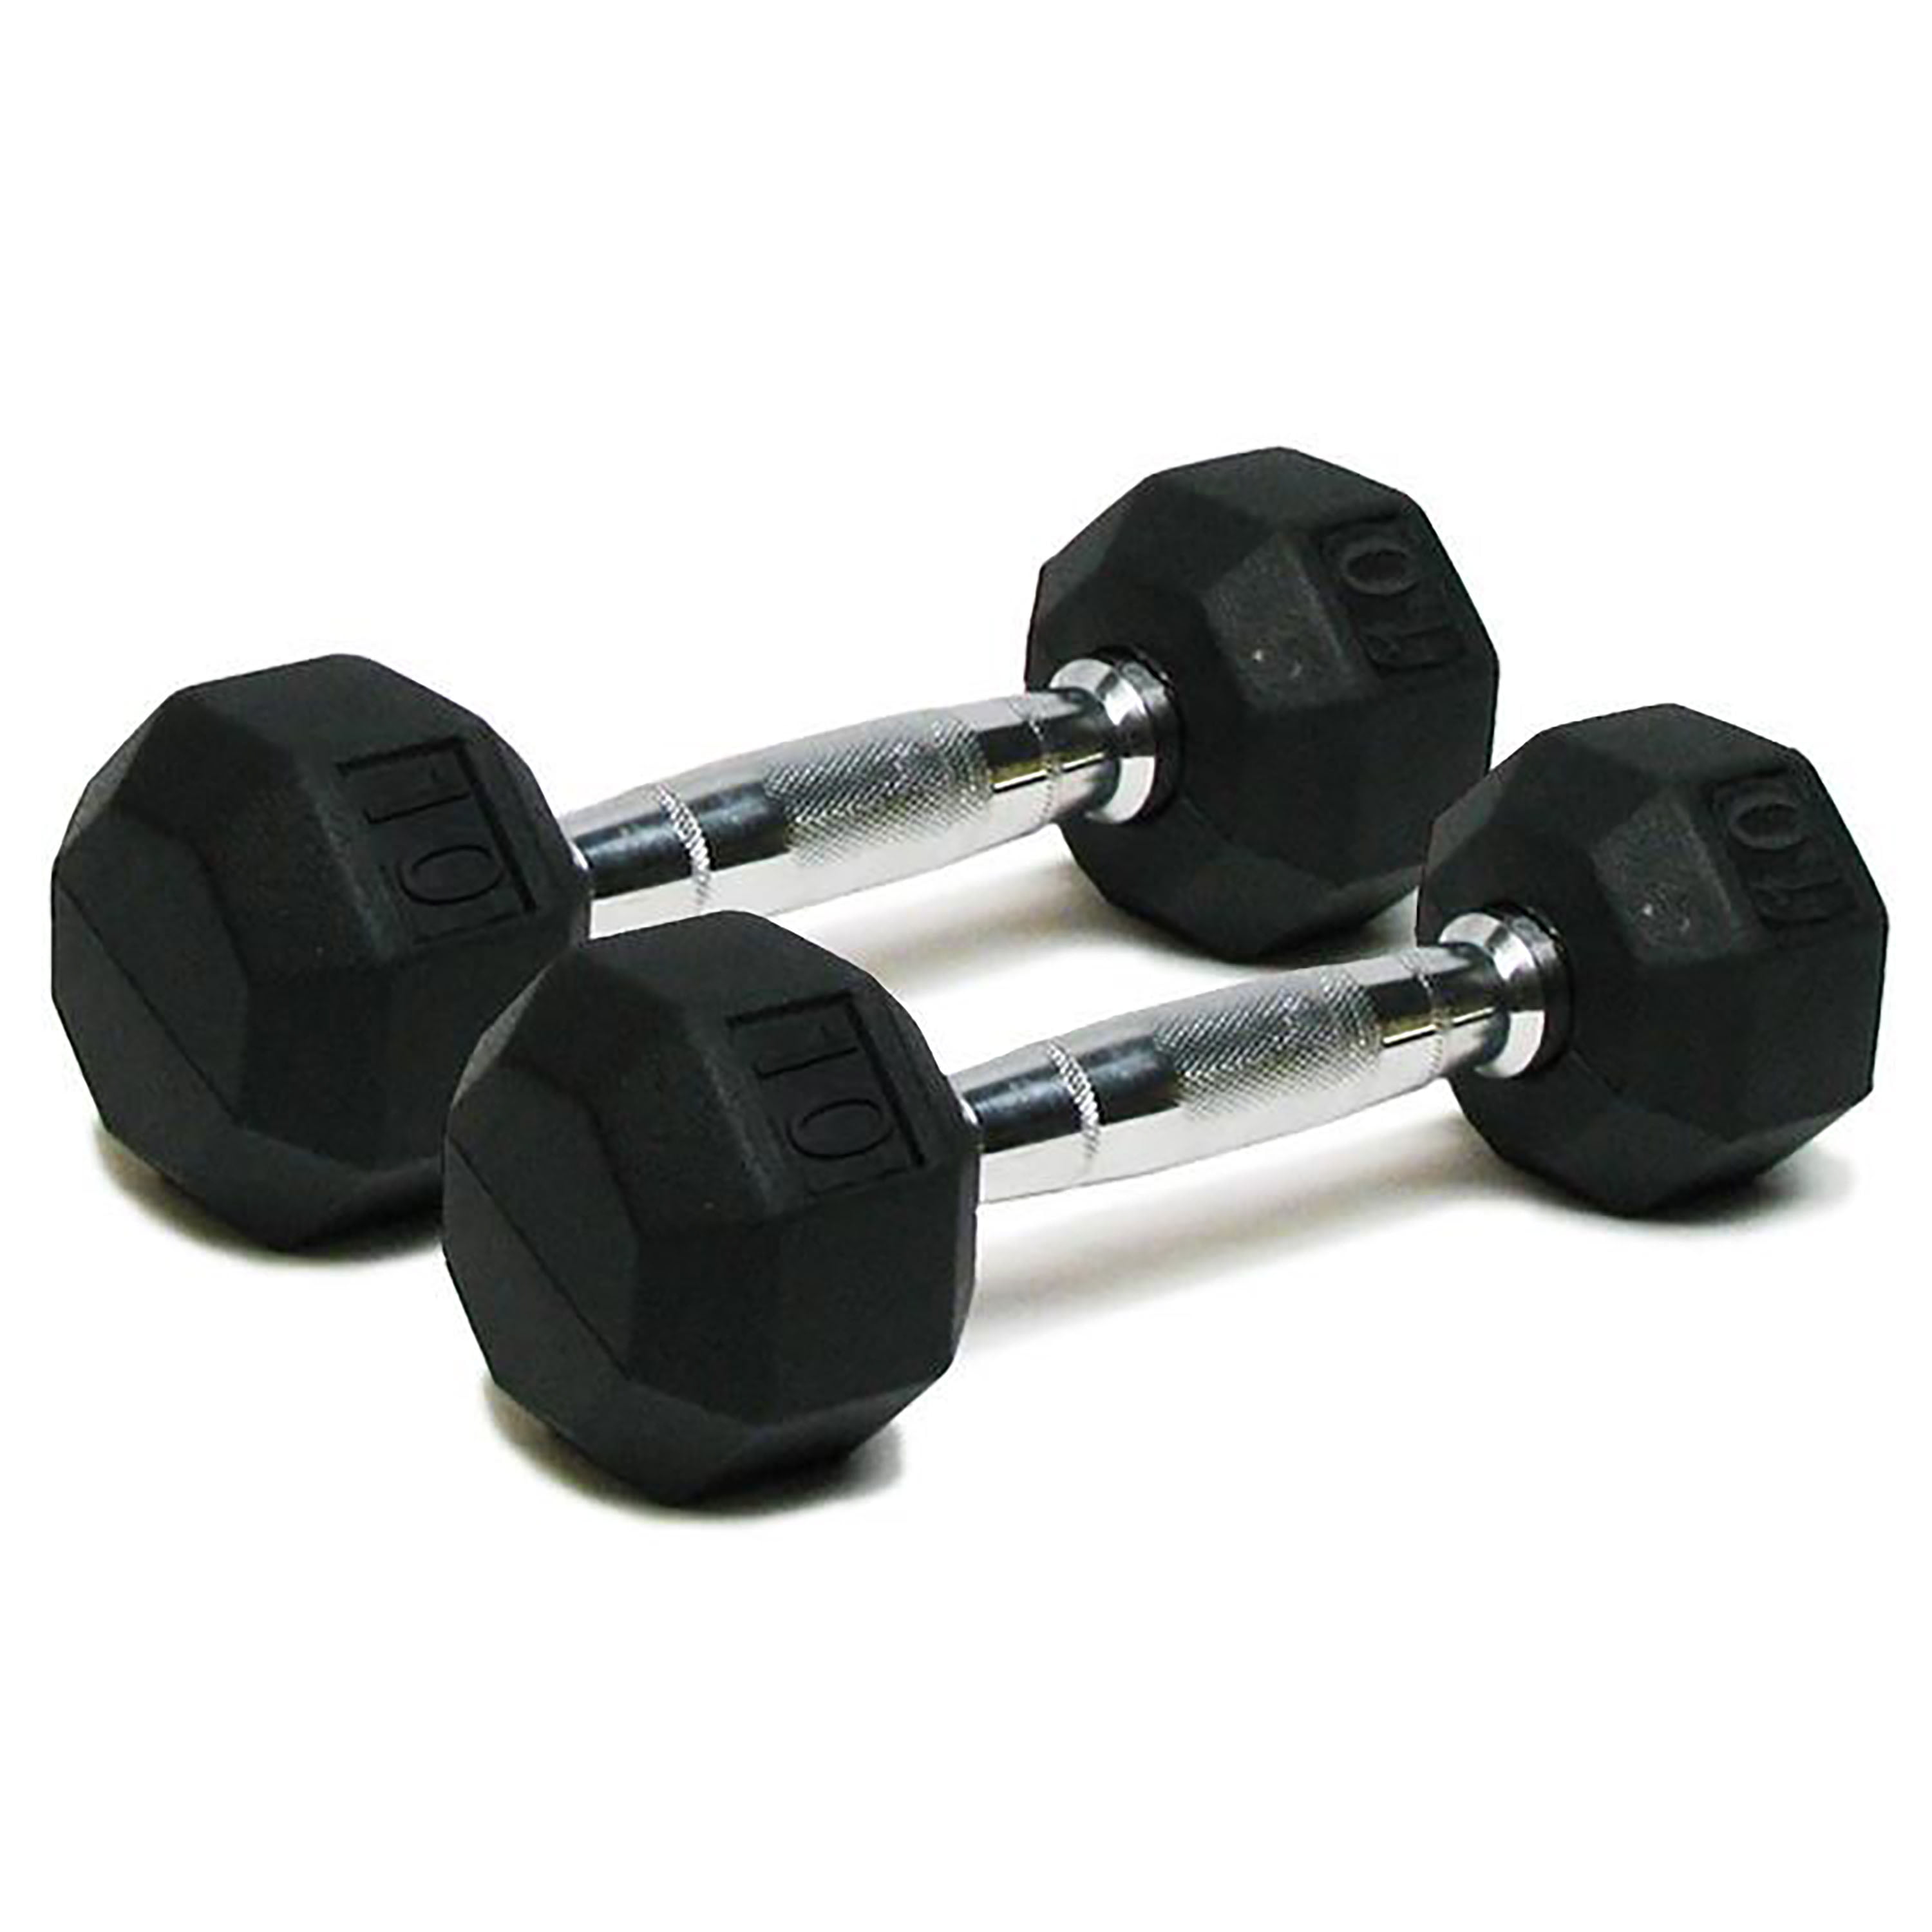 Weider 10 Lb Hex Dumbbell Barbell Rubber Coated 20Lbs Total Set of 2 Ships Today 